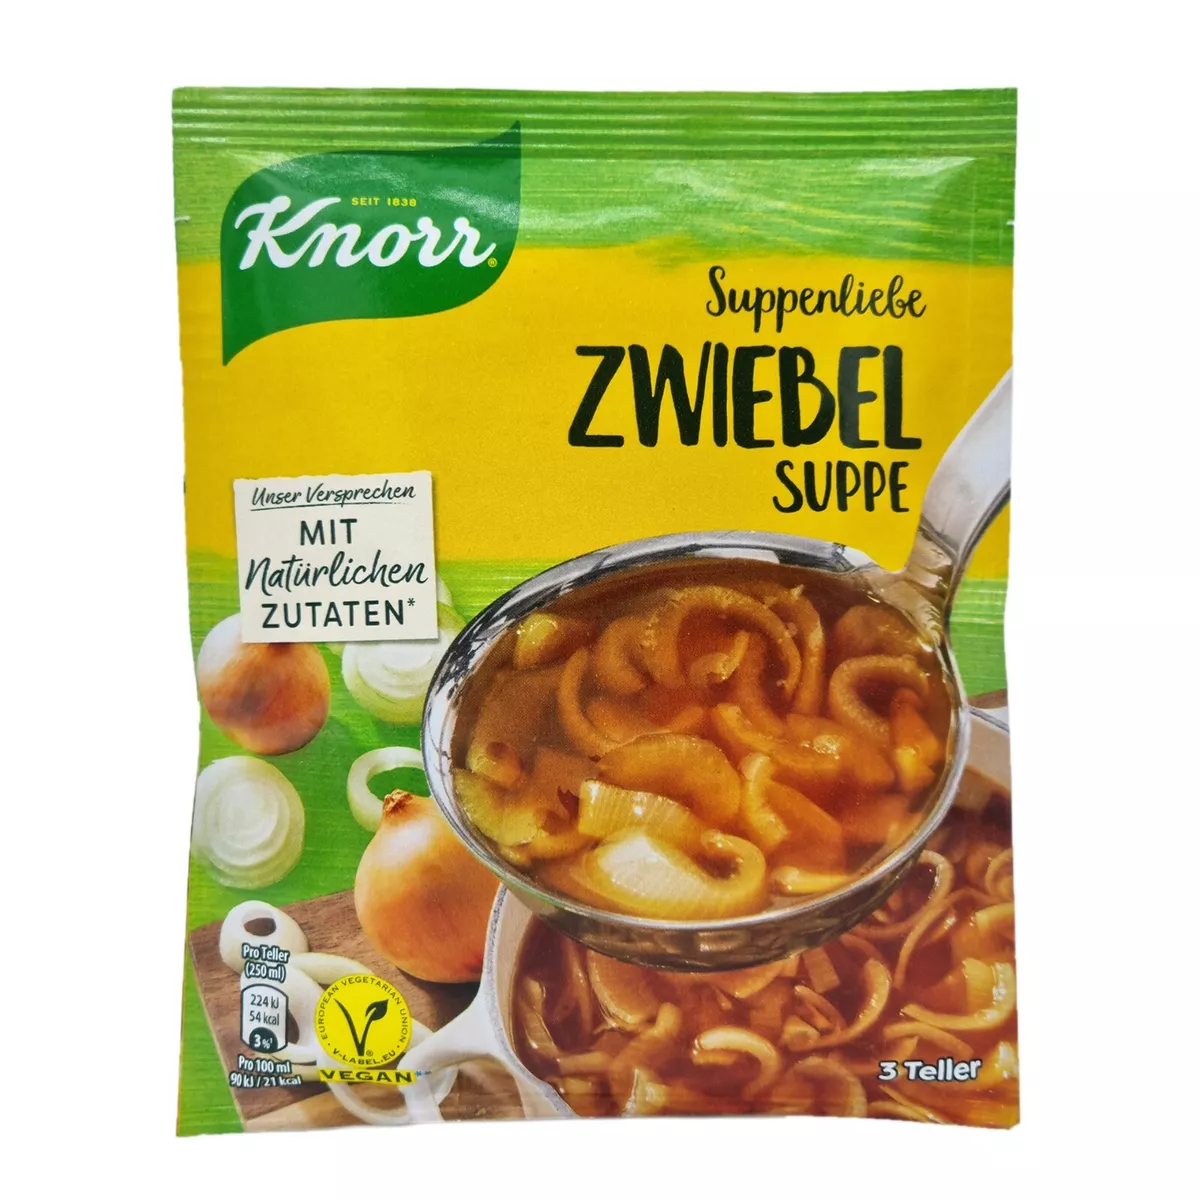 8x Knorr Suppenliebe 🍲 soup onion Suppe eBay Zwiebel ✈TRACKED | SHIPPING